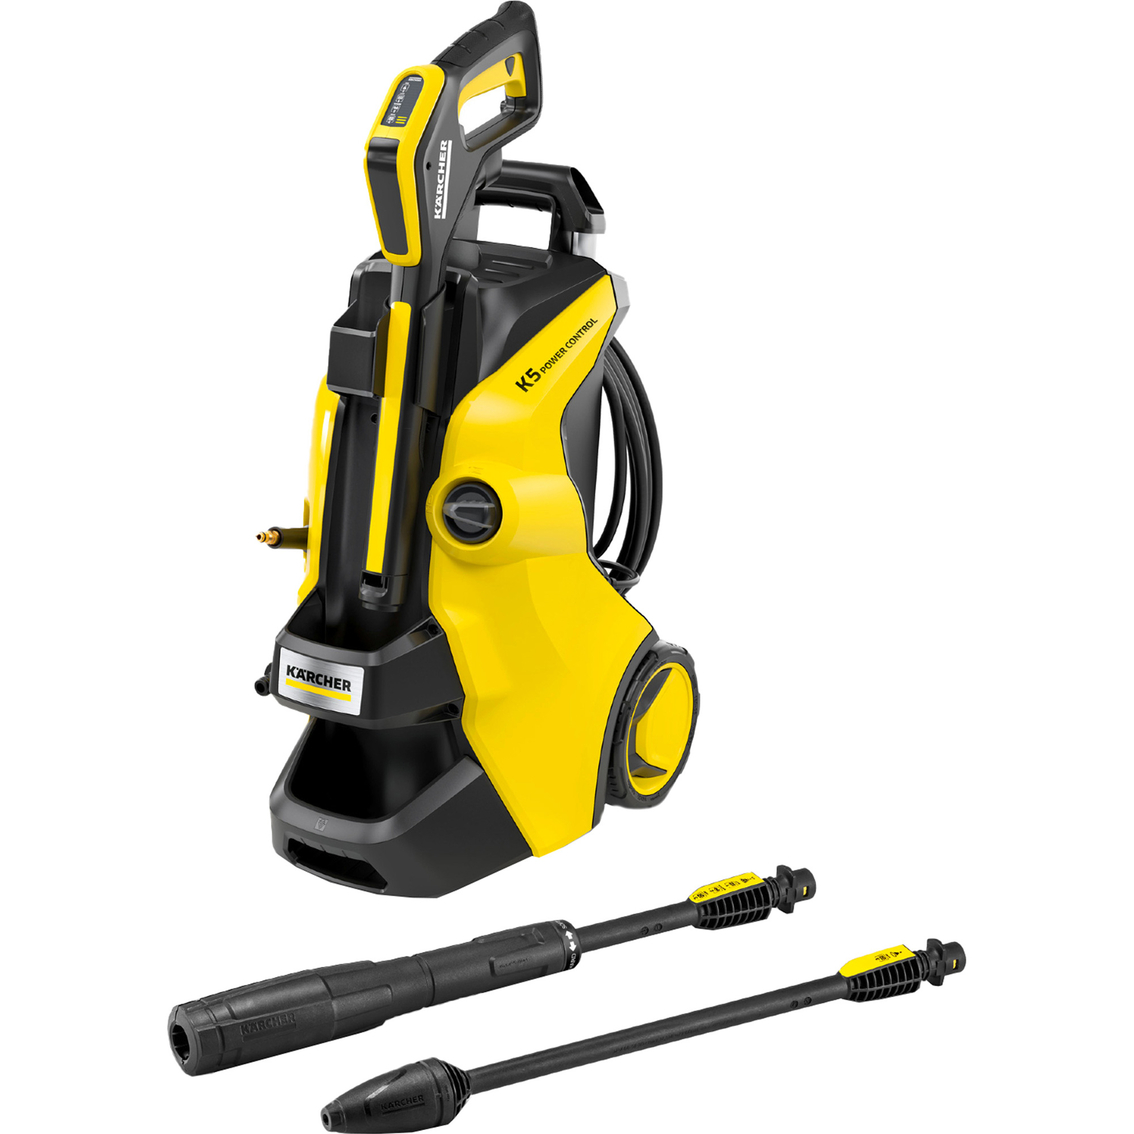 Karcher K5 Power Control 2000 PSI Electric Pressure Washer - Image 1 of 10